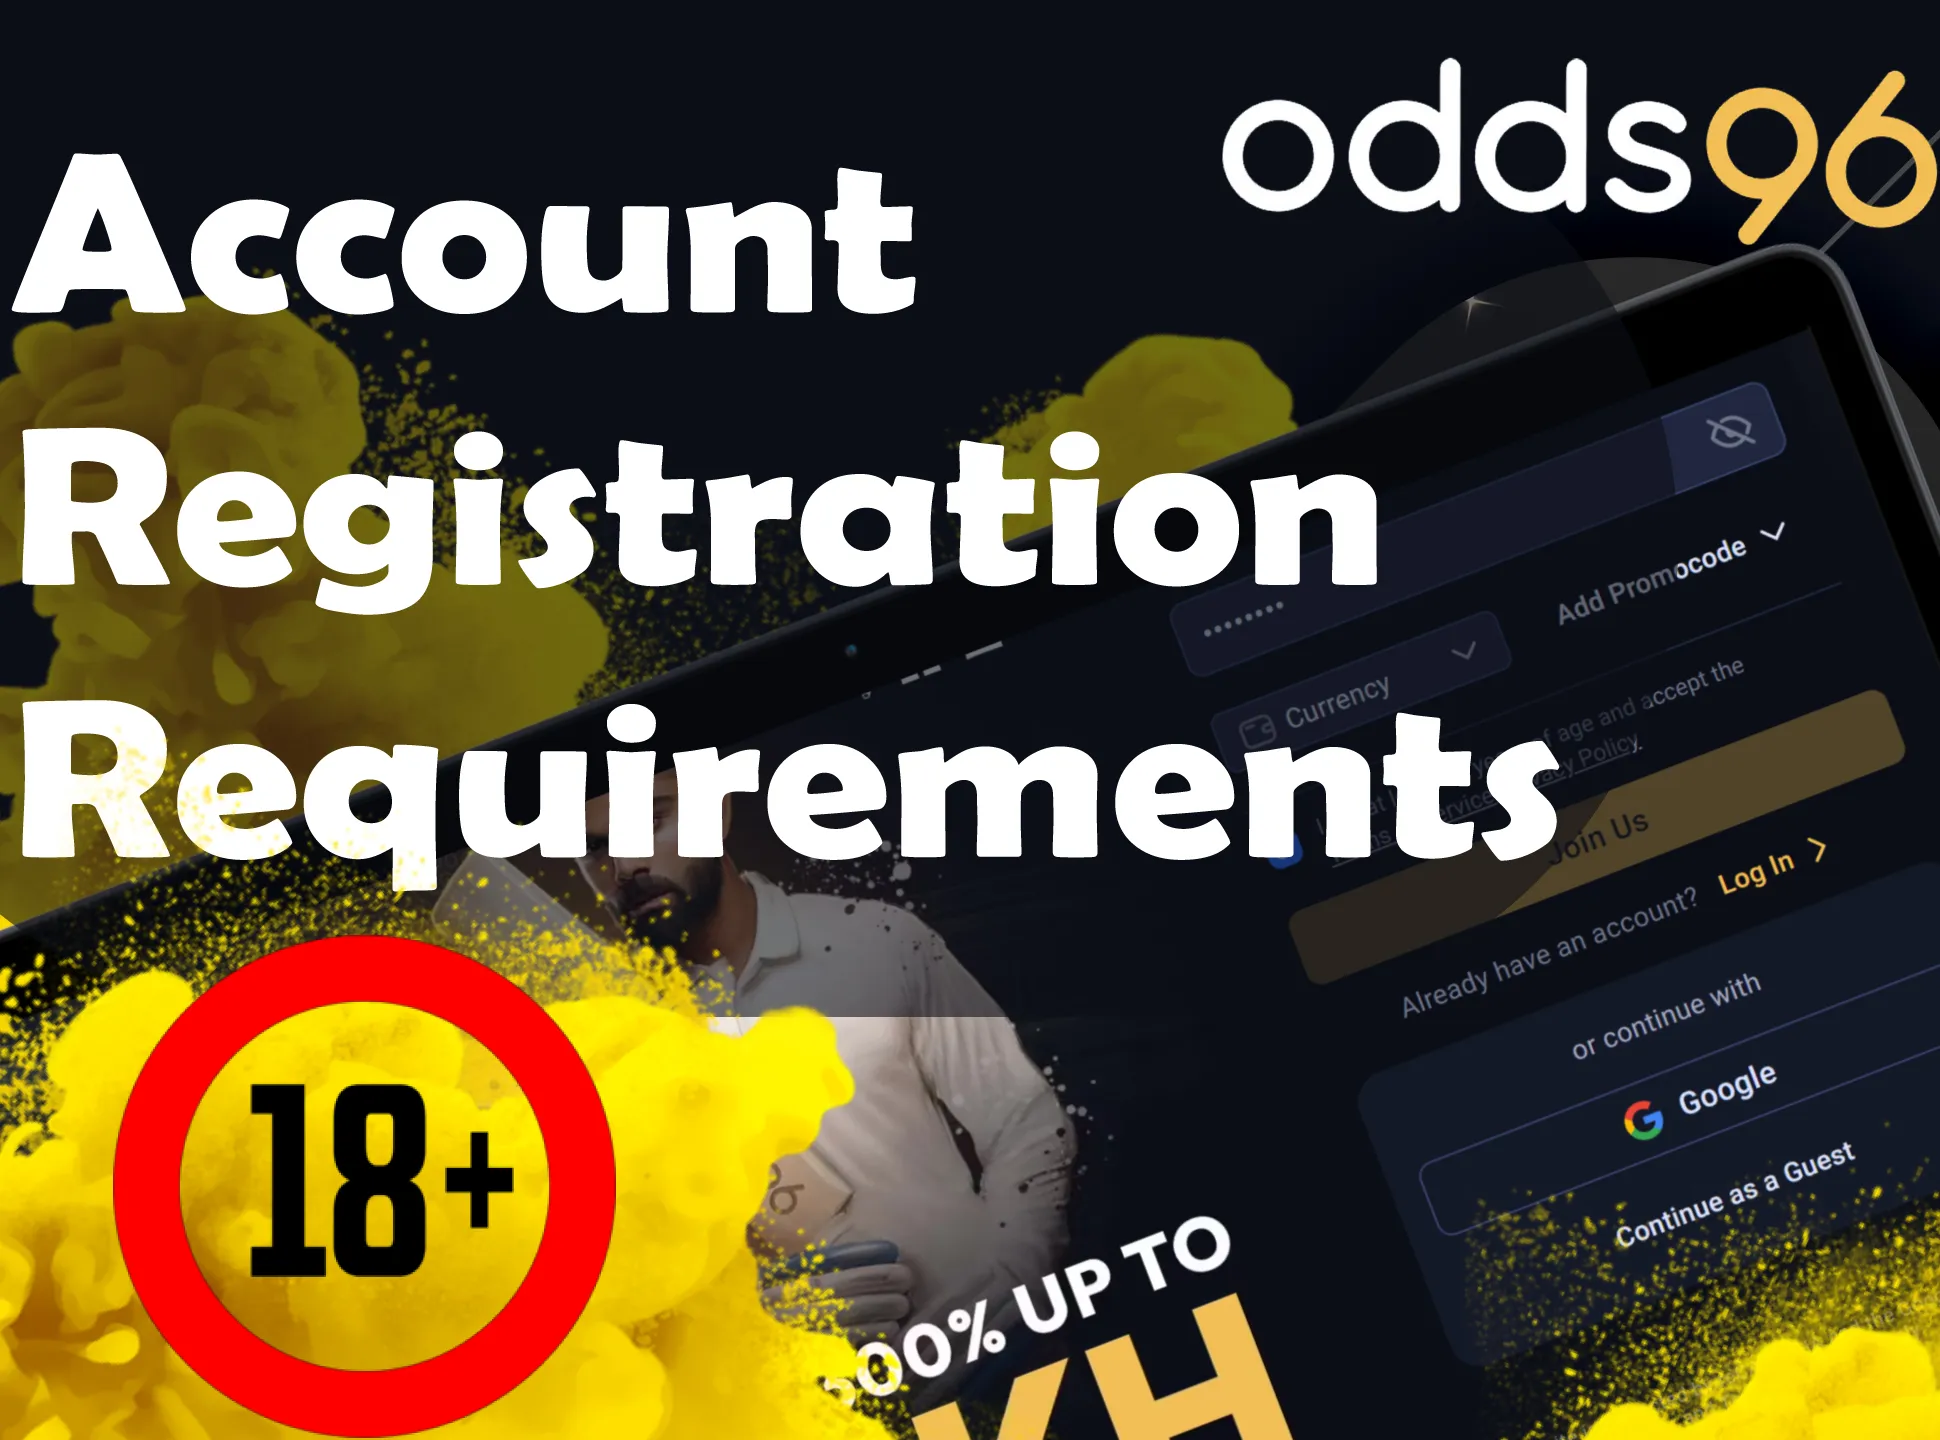 Follow all of the required registration rules while making your Odds96 account.